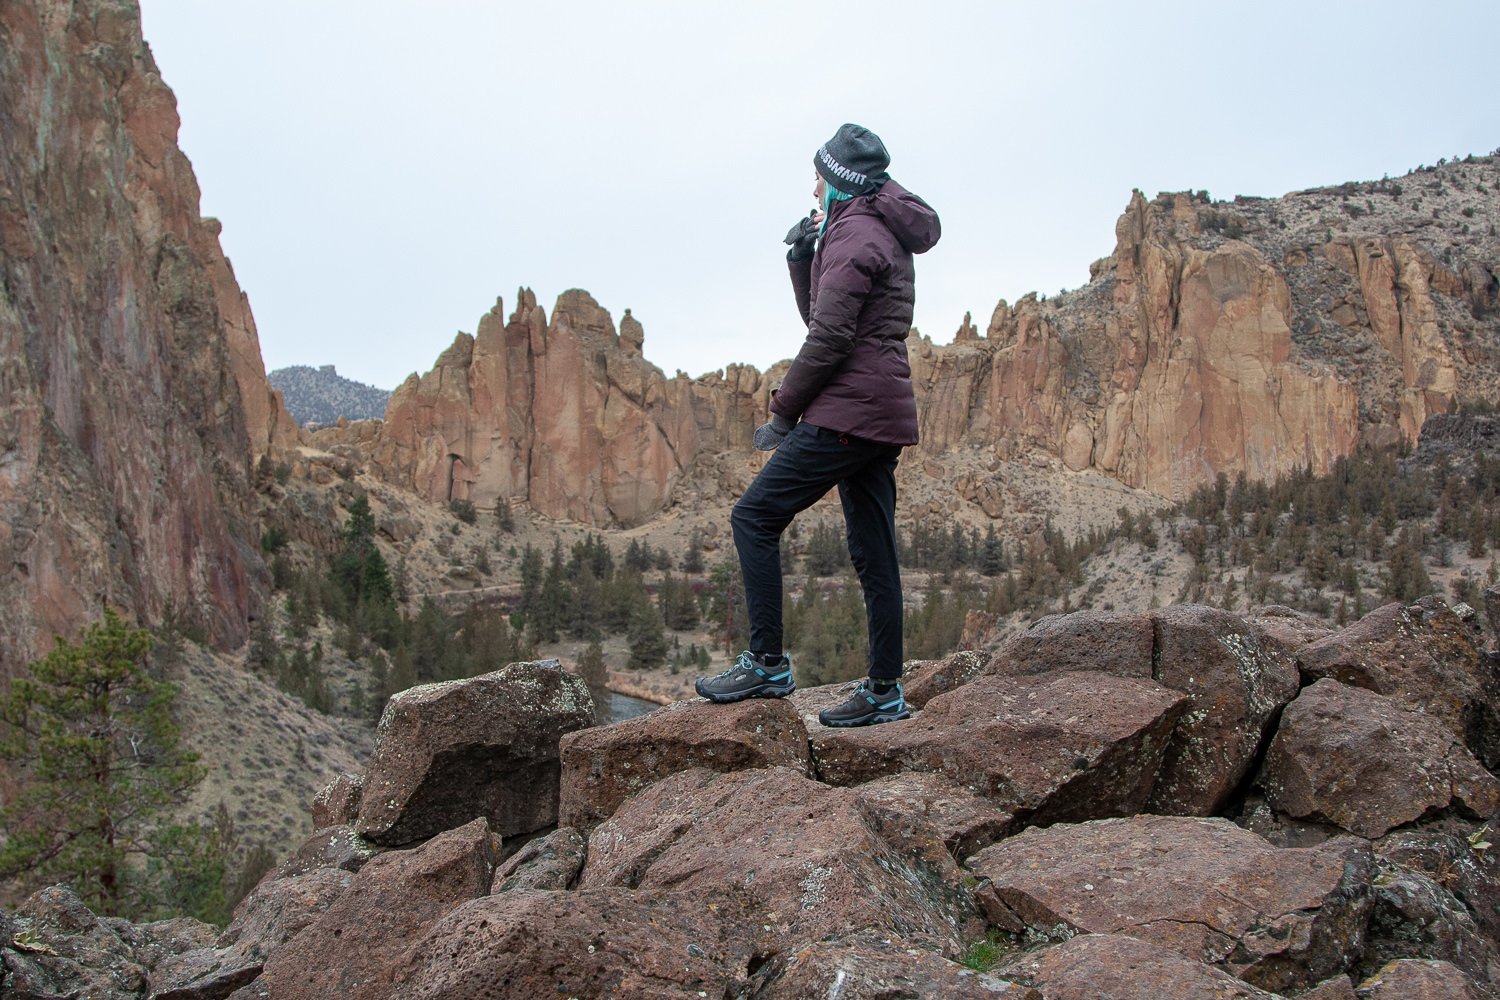 A hiker wearing the REI Stormhenge jacket on a rocky outcrop with somejagged peaks in the background. The sky is gray